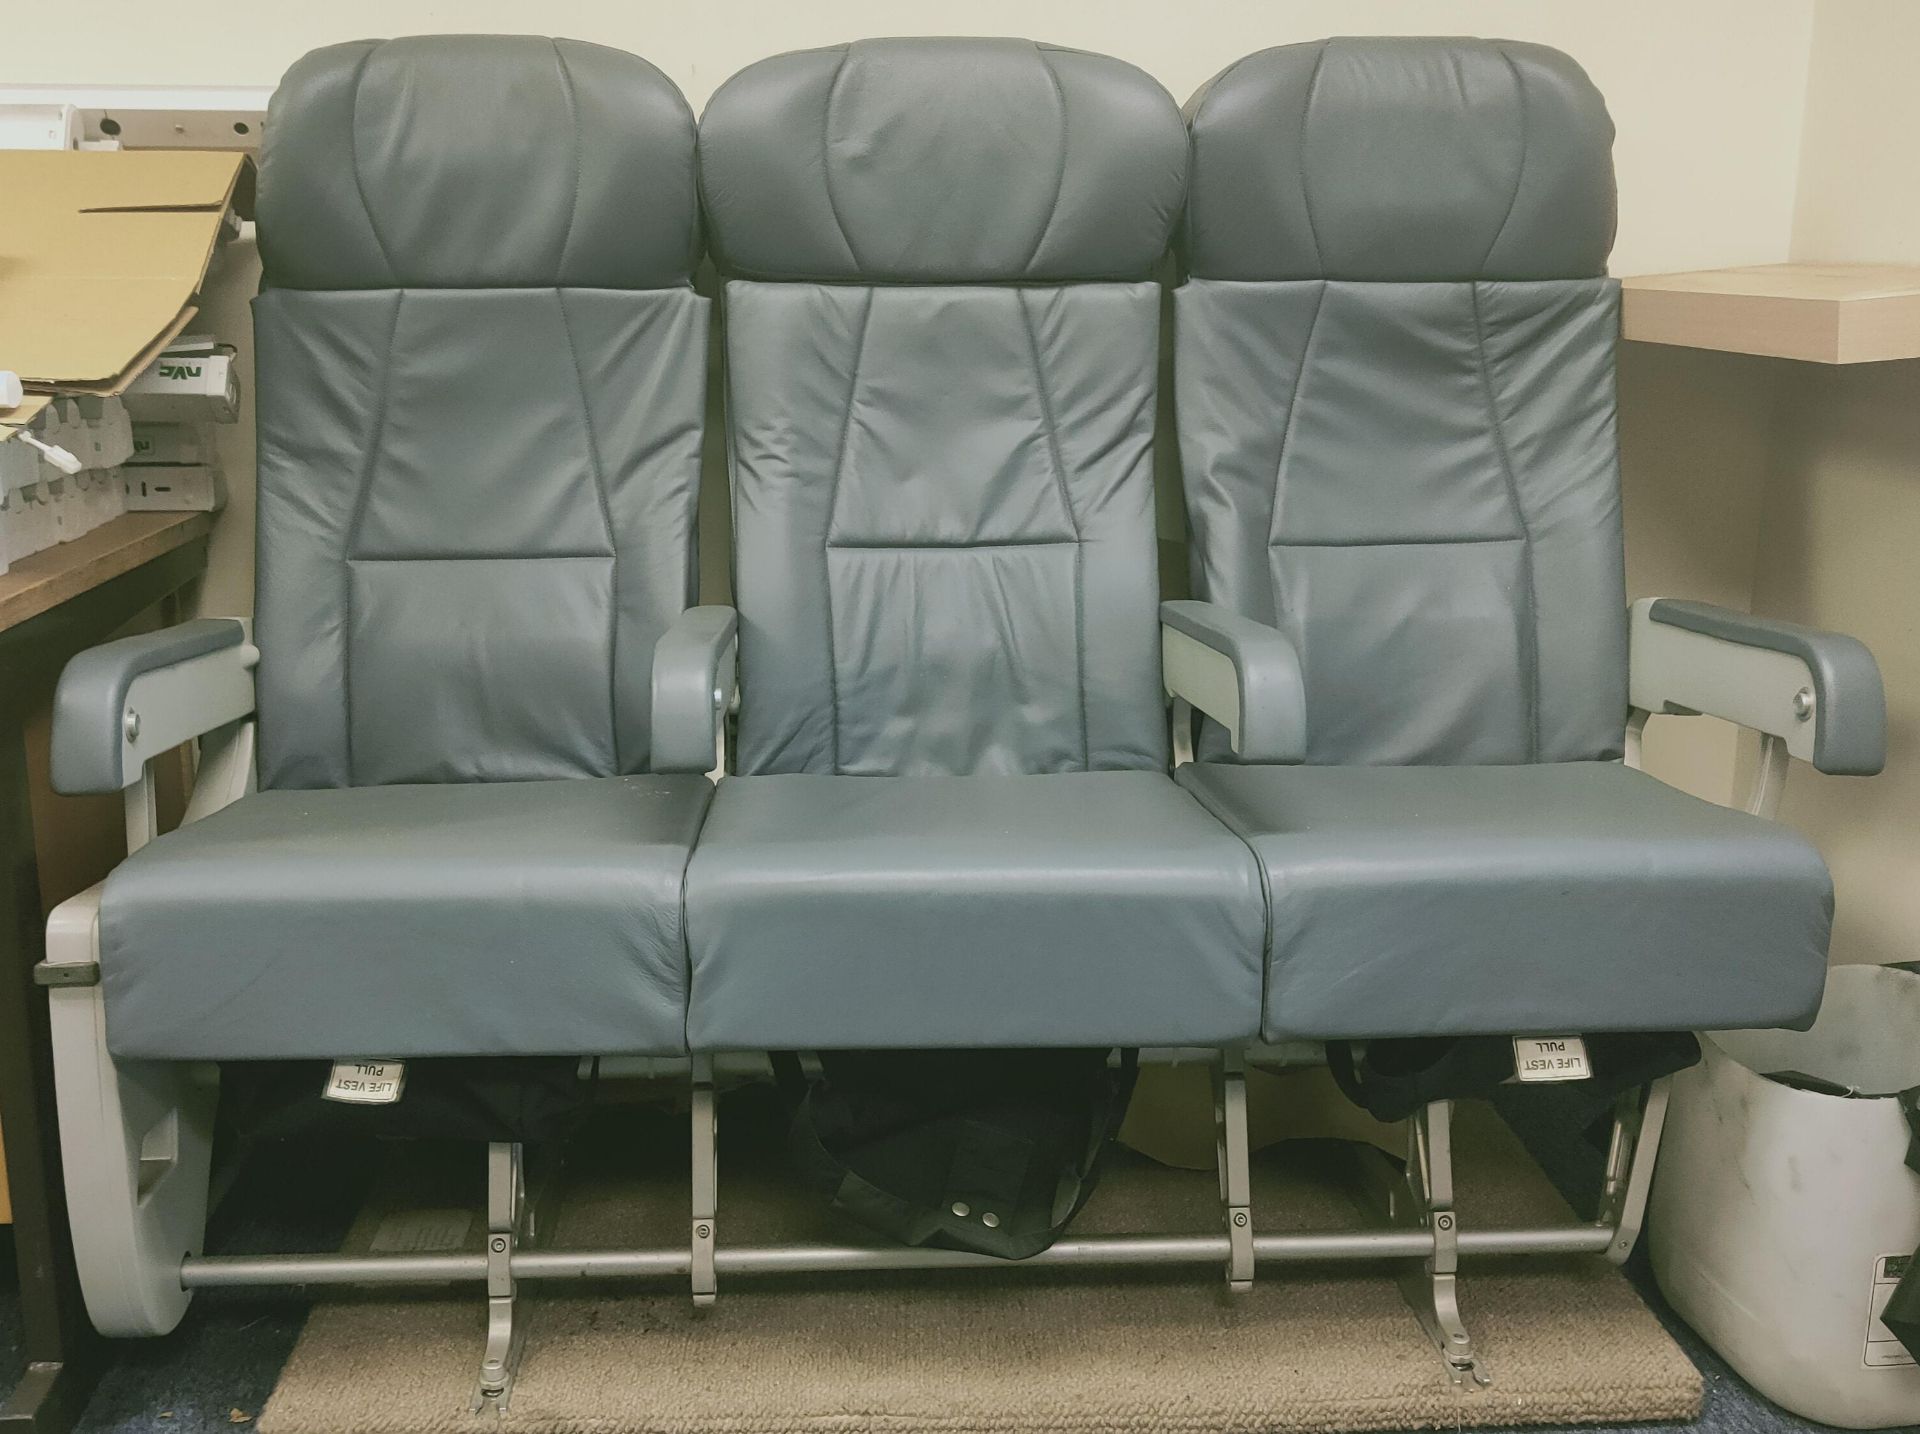 Set of Three Leather Aeroplane Seats (unused), loading free of charge – yes Please read the